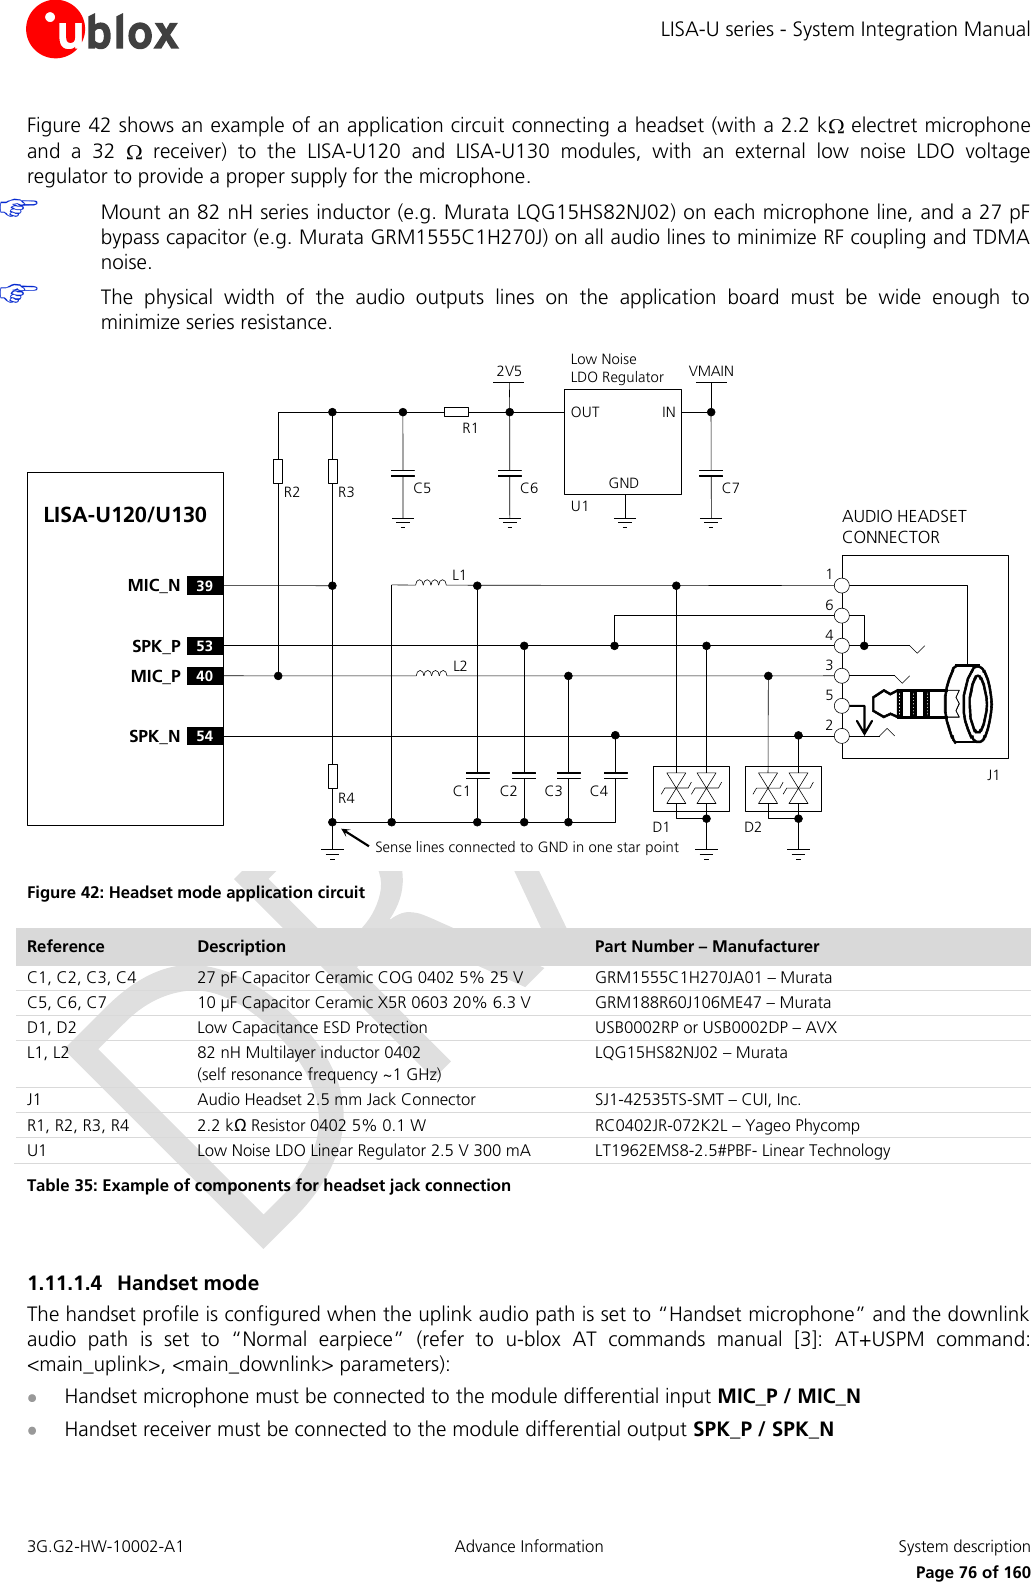 LISA-U series - System Integration Manual 3G.G2-HW-10002-A1  Advance Information  System description      Page 76 of 160 Figure 42 shows an example of an application circuit connecting a headset (with a 2.2 k  electret microphone and  a  32    receiver)  to  the  LISA-U120  and  LISA-U130  modules,  with  an  external  low  noise  LDO  voltage regulator to provide a proper supply for the microphone.  Mount an 82 nH series inductor (e.g. Murata LQG15HS82NJ02) on each microphone line, and a 27 pF bypass capacitor (e.g. Murata GRM1555C1H270J) on all audio lines to minimize RF coupling and TDMA noise.  The  physical  width  of  the  audio  outputs  lines  on  the  application  board  must  be  wide  enough  to minimize series resistance. LISA-U120/U130C2 C3 C4J1253461L254SPK_N53SPK_P39MIC_N40MIC_PD1AUDIO HEADSET CONNECTORD2INOUTGNDLow Noise LDO Regulator VMAINU1R4R1C6R3R2 C52V5Sense lines connected to GND in one star pointL1C1C7 Figure 42: Headset mode application circuit Reference Description Part Number – Manufacturer C1, C2, C3, C4 27 pF Capacitor Ceramic COG 0402 5% 25 V  GRM1555C1H270JA01 – Murata C5, C6, C7 10 µF Capacitor Ceramic X5R 0603 20% 6.3 V GRM188R60J106ME47 – Murata D1, D2 Low Capacitance ESD Protection USB0002RP or USB0002DP – AVX L1, L2 82 nH Multilayer inductor 0402 (self resonance frequency ~1 GHz) LQG15HS82NJ02 – Murata J1 Audio Headset 2.5 mm Jack Connector SJ1-42535TS-SMT – CUI, Inc. R1, R2, R3, R4 2.2 kΩ Resistor 0402 5% 0.1 W  RC0402JR-072K2L – Yageo Phycomp U1 Low Noise LDO Linear Regulator 2.5 V 300 mA LT1962EMS8-2.5#PBF- Linear Technology Table 35: Example of components for headset jack connection  1.11.1.4 Handset mode The handset profile is configured when the uplink audio path is set to “Handset microphone” and the downlink audio  path  is  set  to  “Normal  earpiece”  (refer  to  u-blox AT  commands  manual [3]:  AT+USPM  command: &lt;main_uplink&gt;, &lt;main_downlink&gt; parameters):  Handset microphone must be connected to the module differential input MIC_P / MIC_N  Handset receiver must be connected to the module differential output SPK_P / SPK_N 